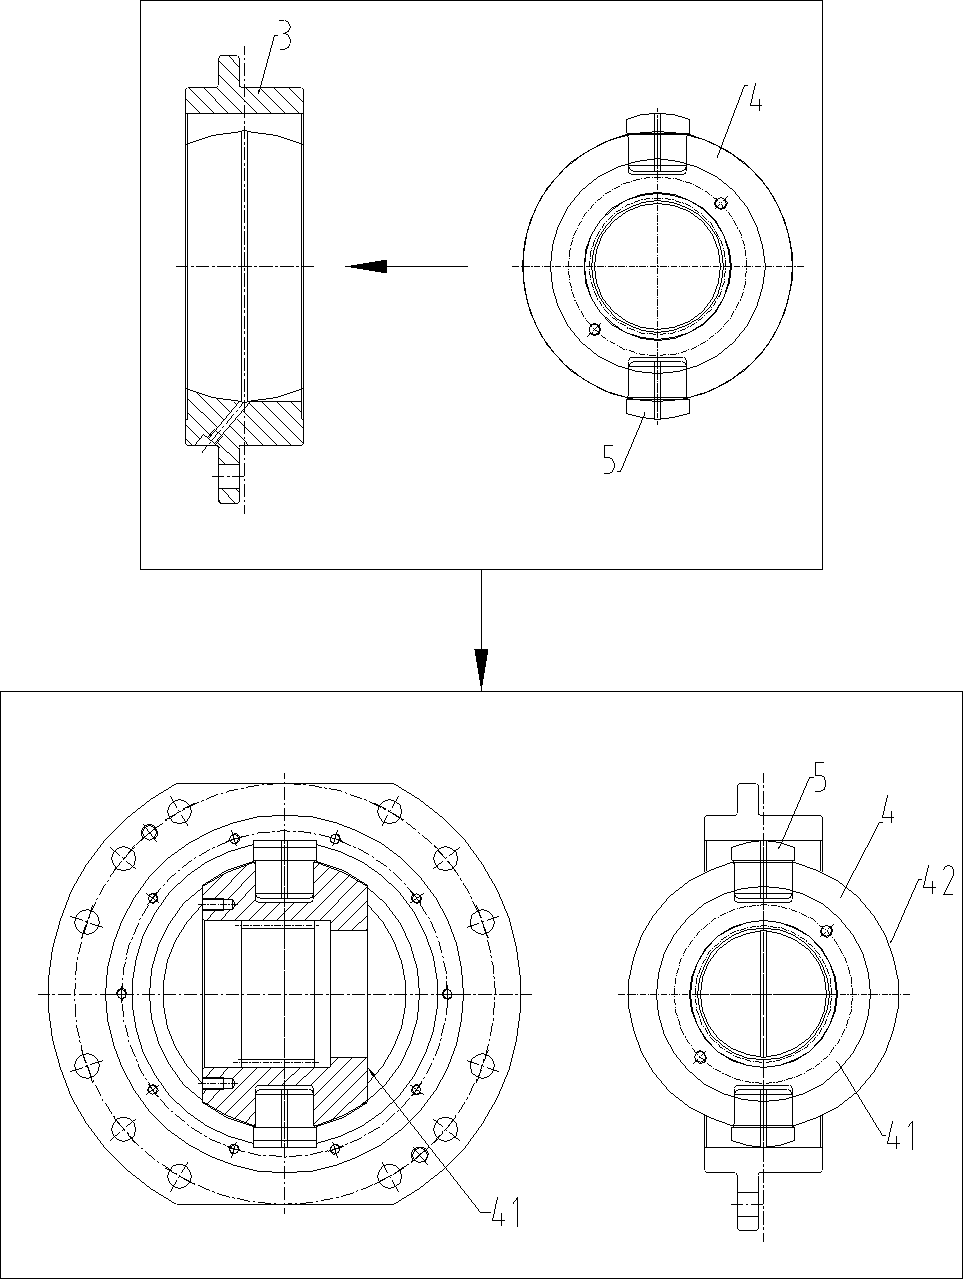 Assembly method of ball joint coupling and ball joint base of ball joint coupling